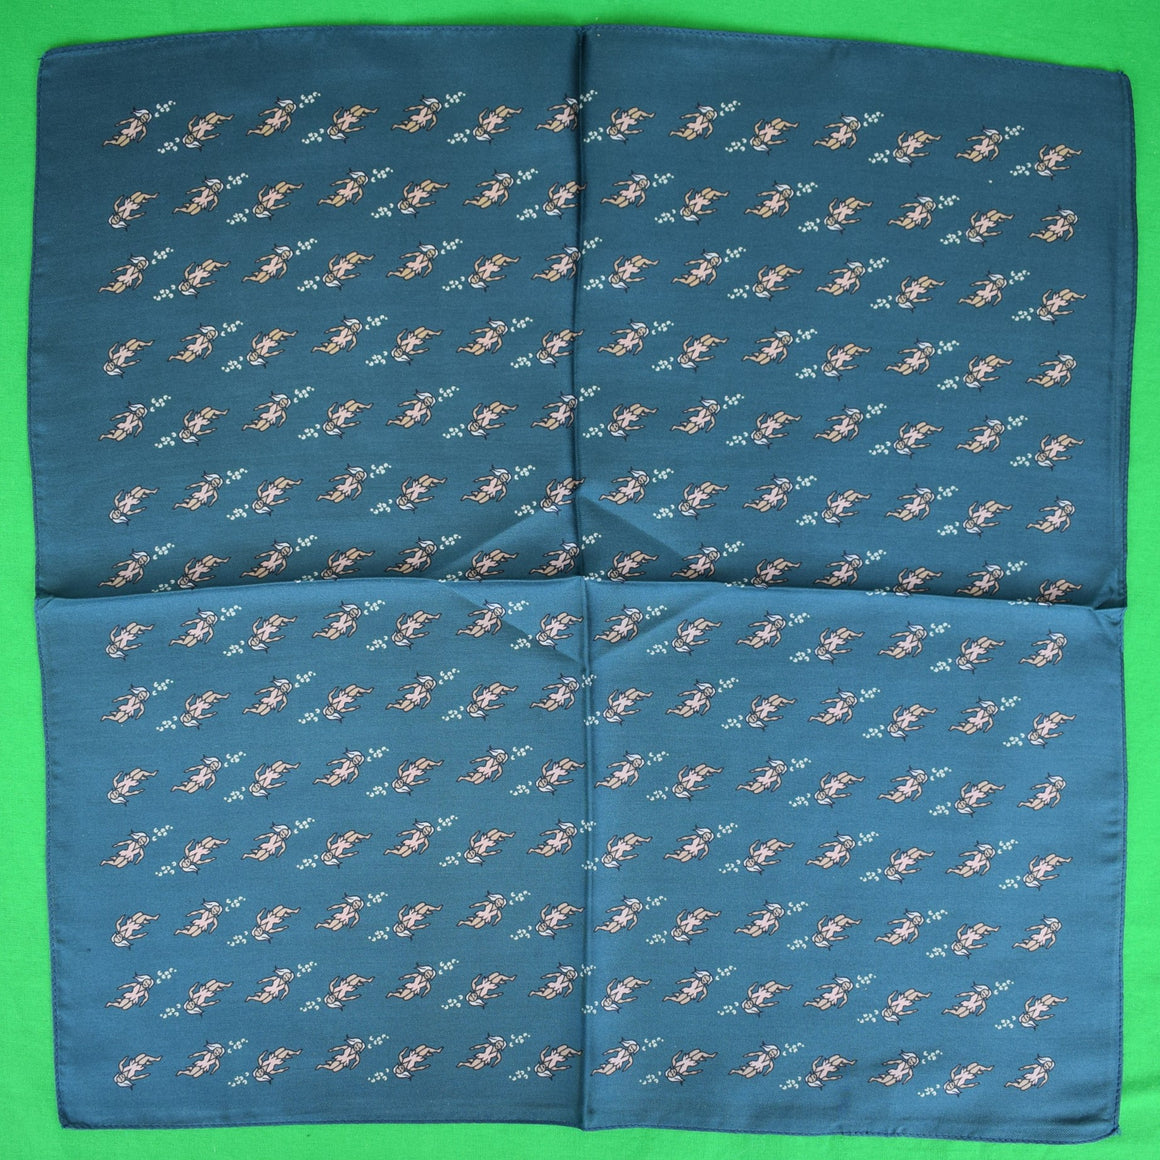 "Macclesfield Antique English Teal Silk w/ Cave Woman c1950s Pocket Square"